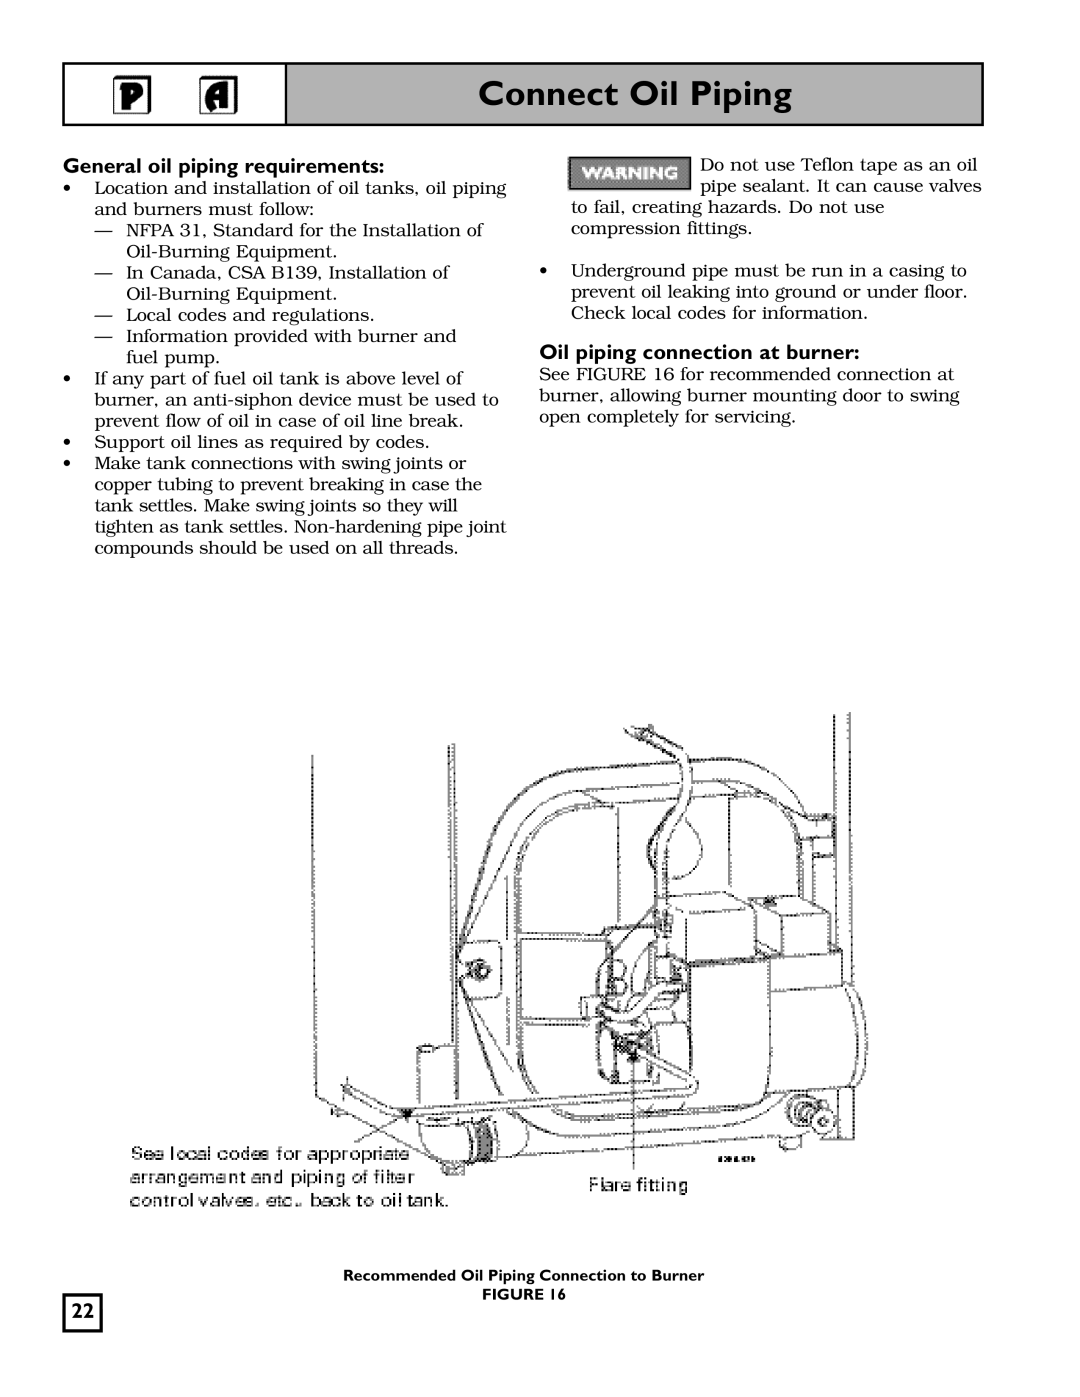 Weil-McLain 550-141-826/1201 manual Connect Oil Piping, General oil piping requirements, Oil piping connection at burner 